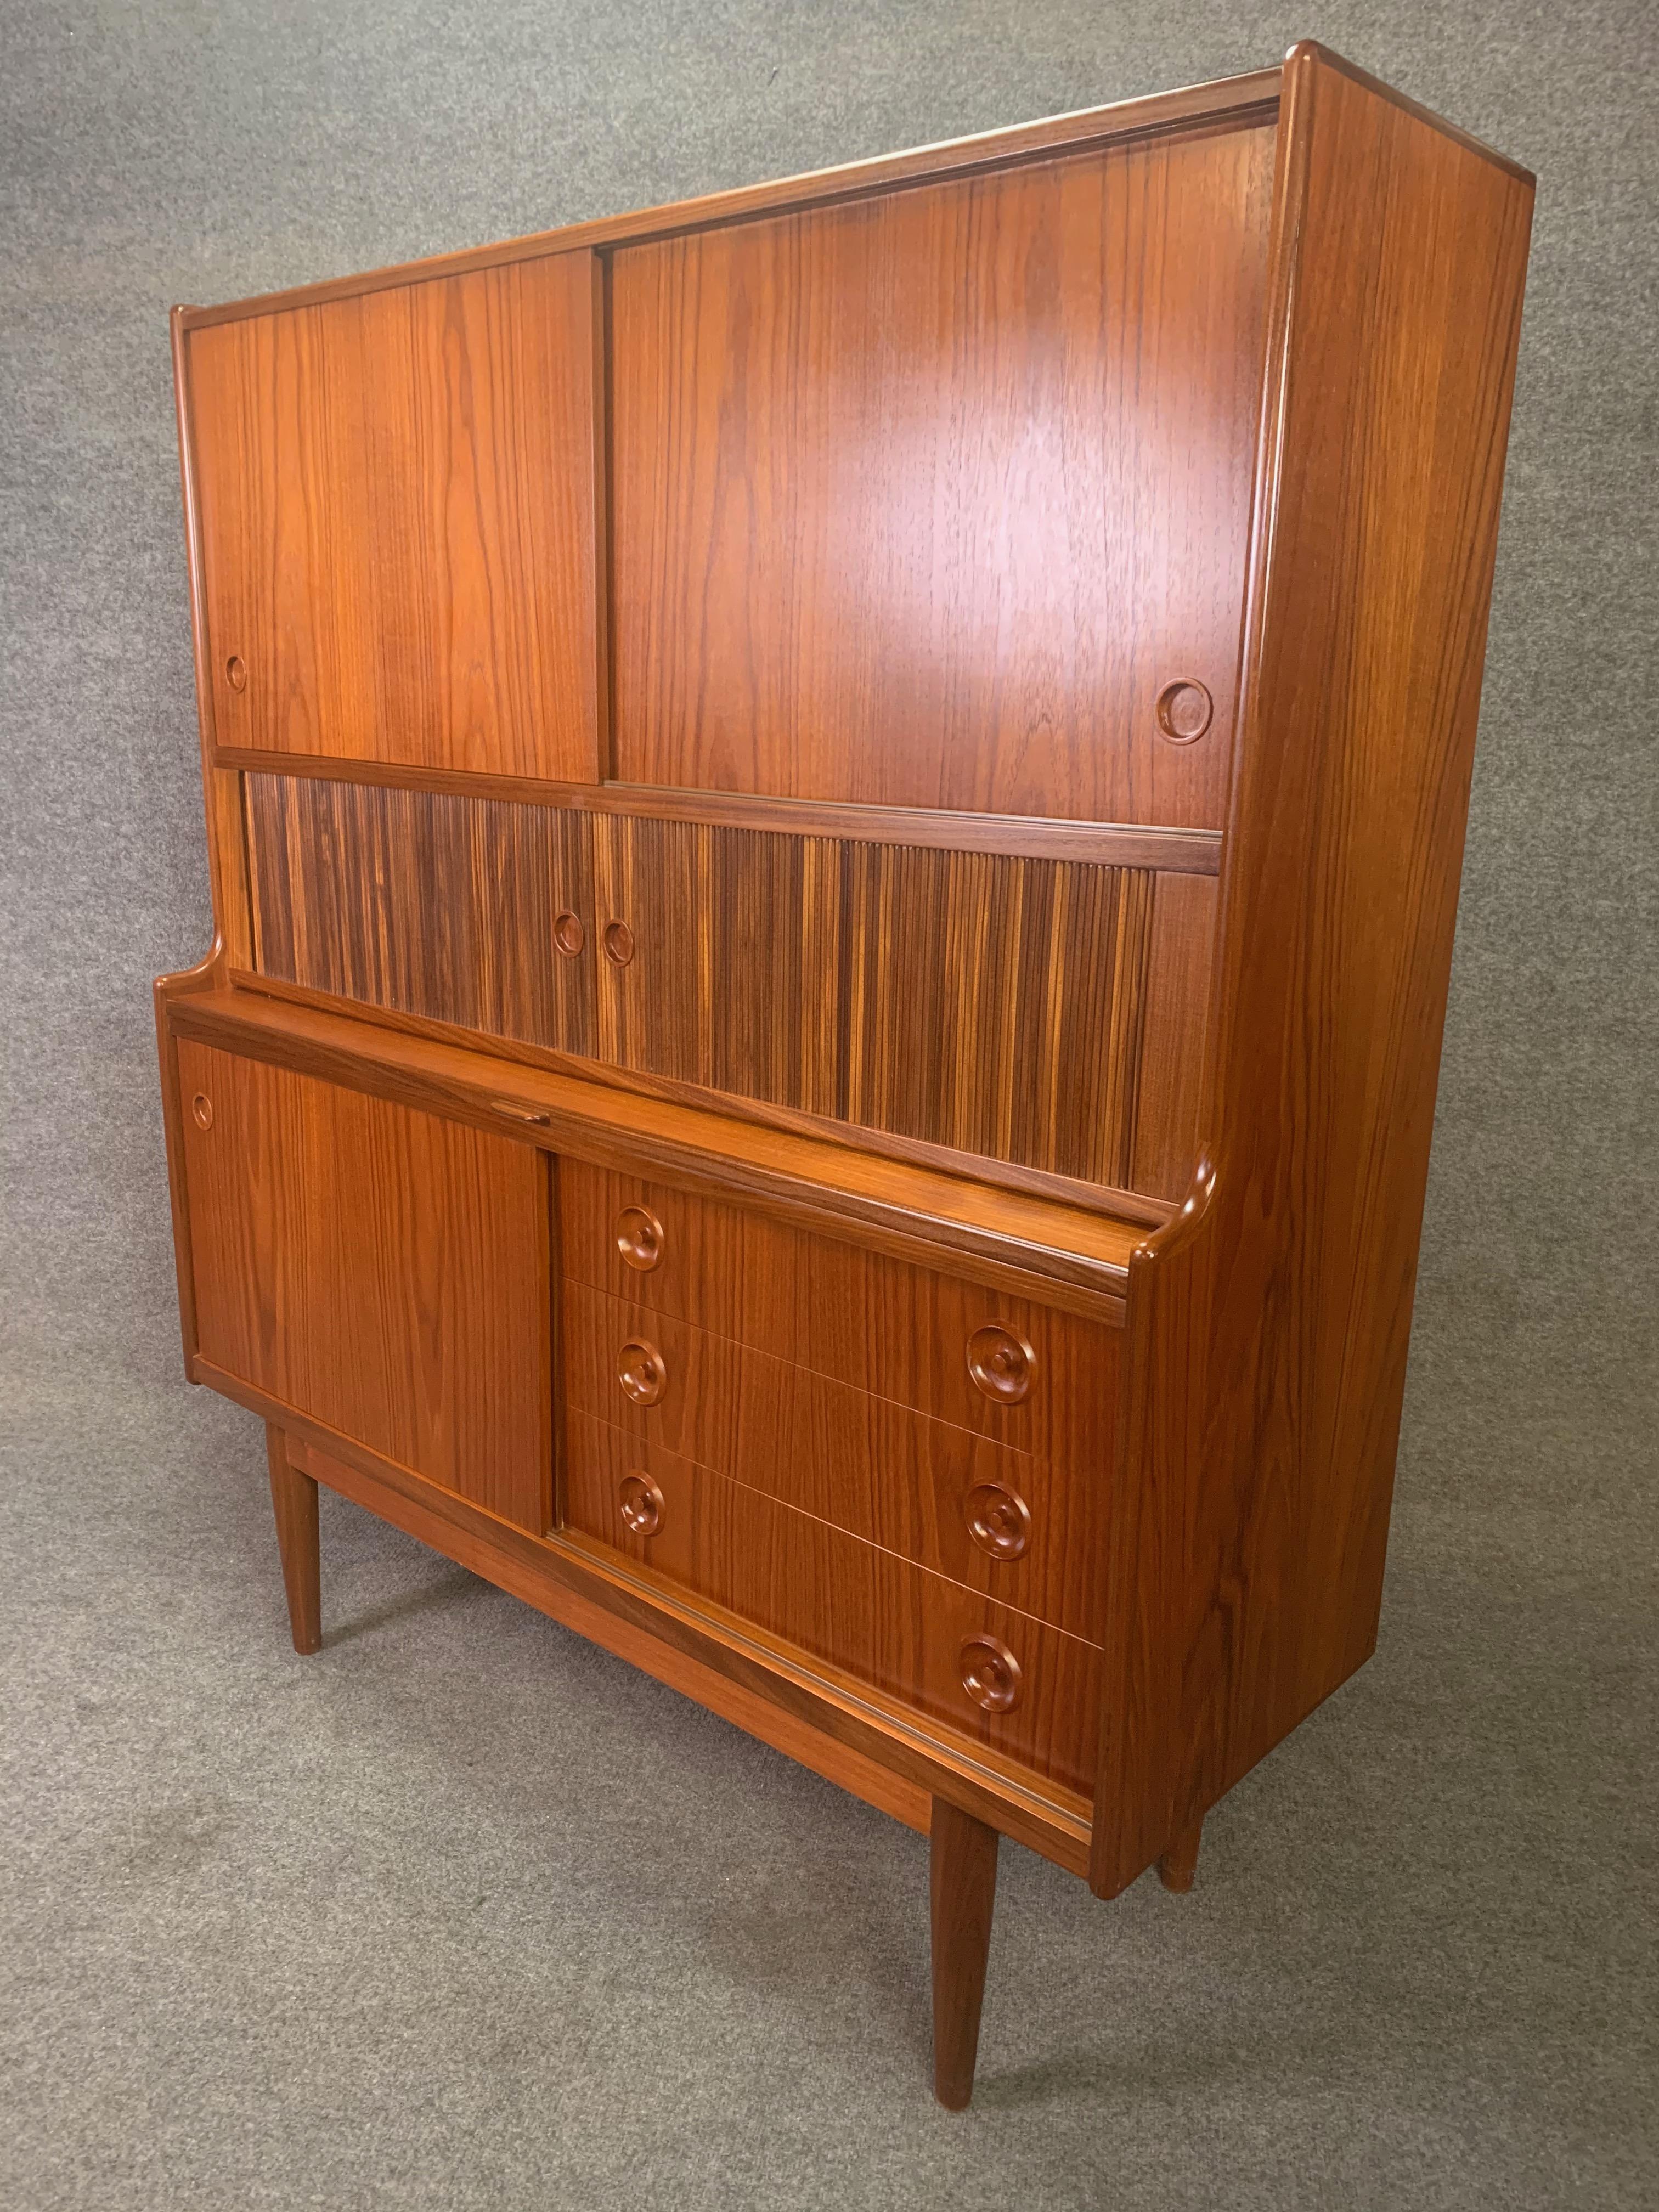 Here is a beautiful Scandinavian Modern teak high credenza designed by Johannes Andersen and manufactured by J. Skaaning Mobler in Denmark in the 1960s.
This special case piece, recently imported from Copenhagen to California, features a vibrant